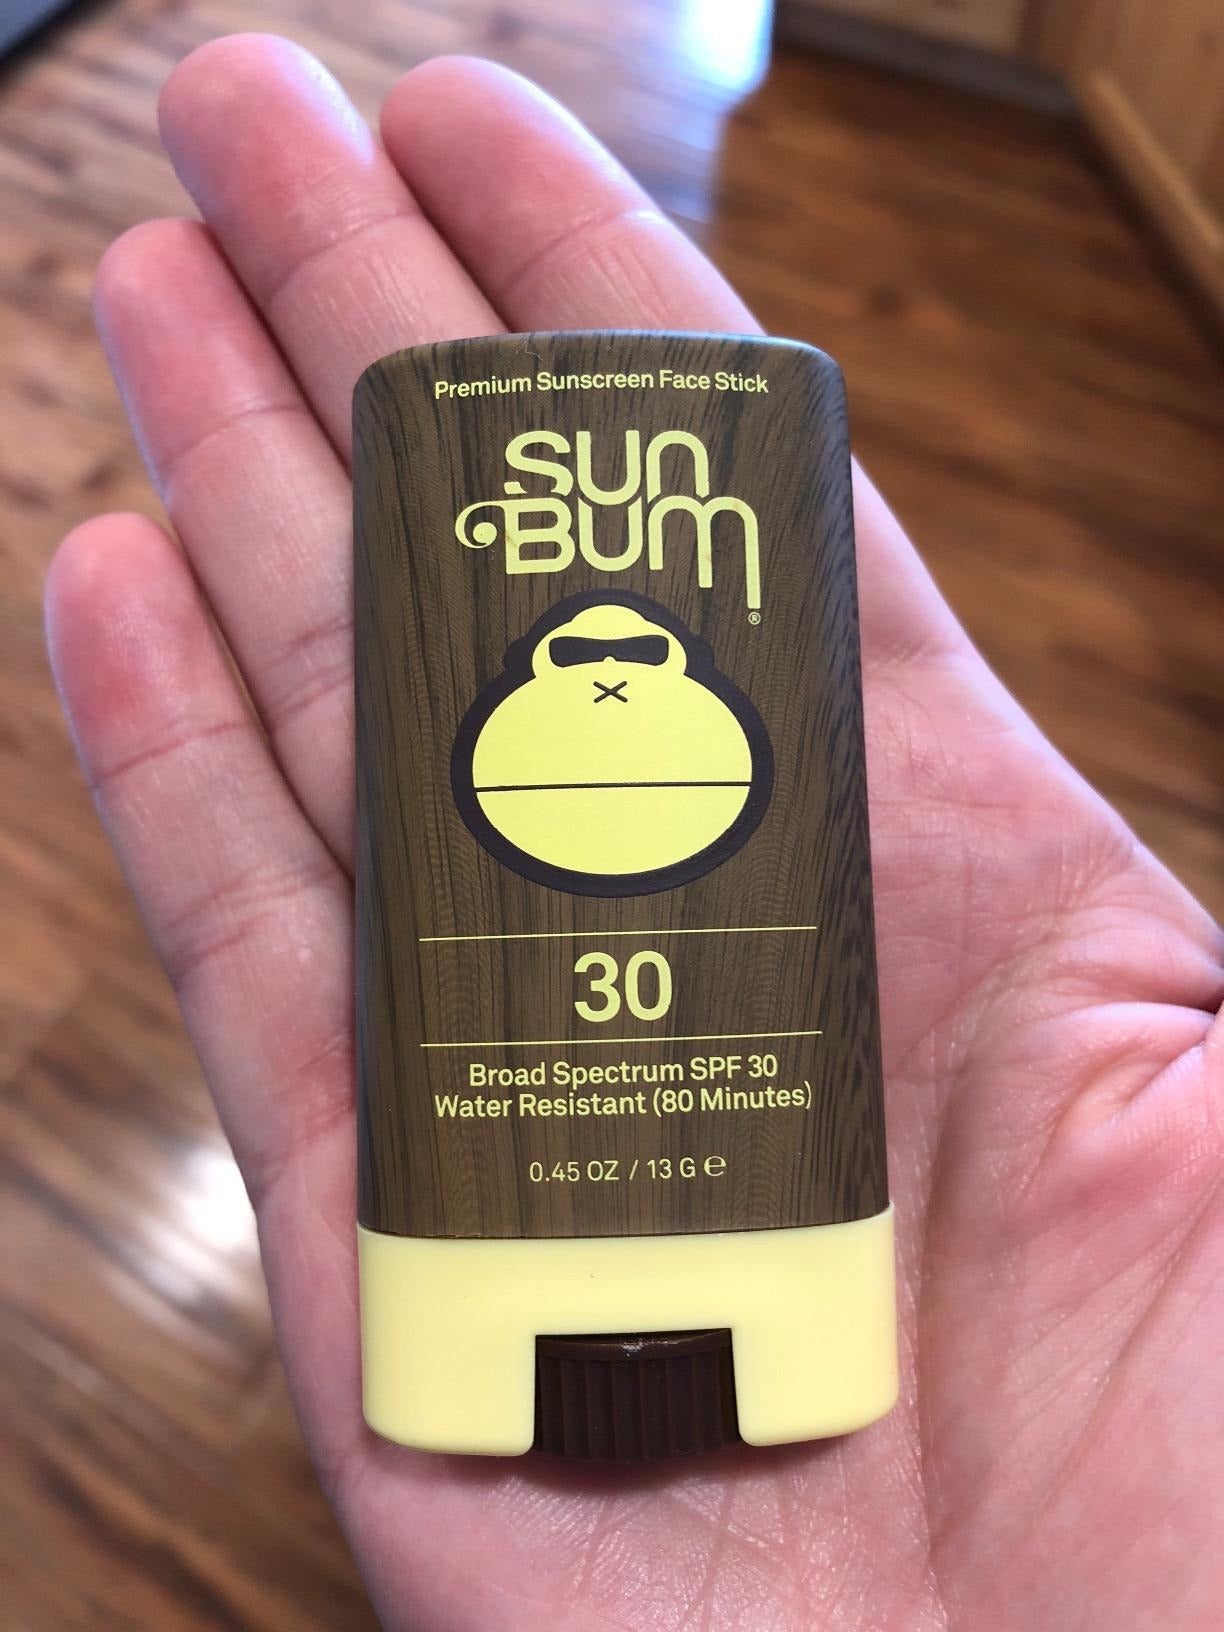 image of the sunscreen stick in the palm of a reviewer's hand